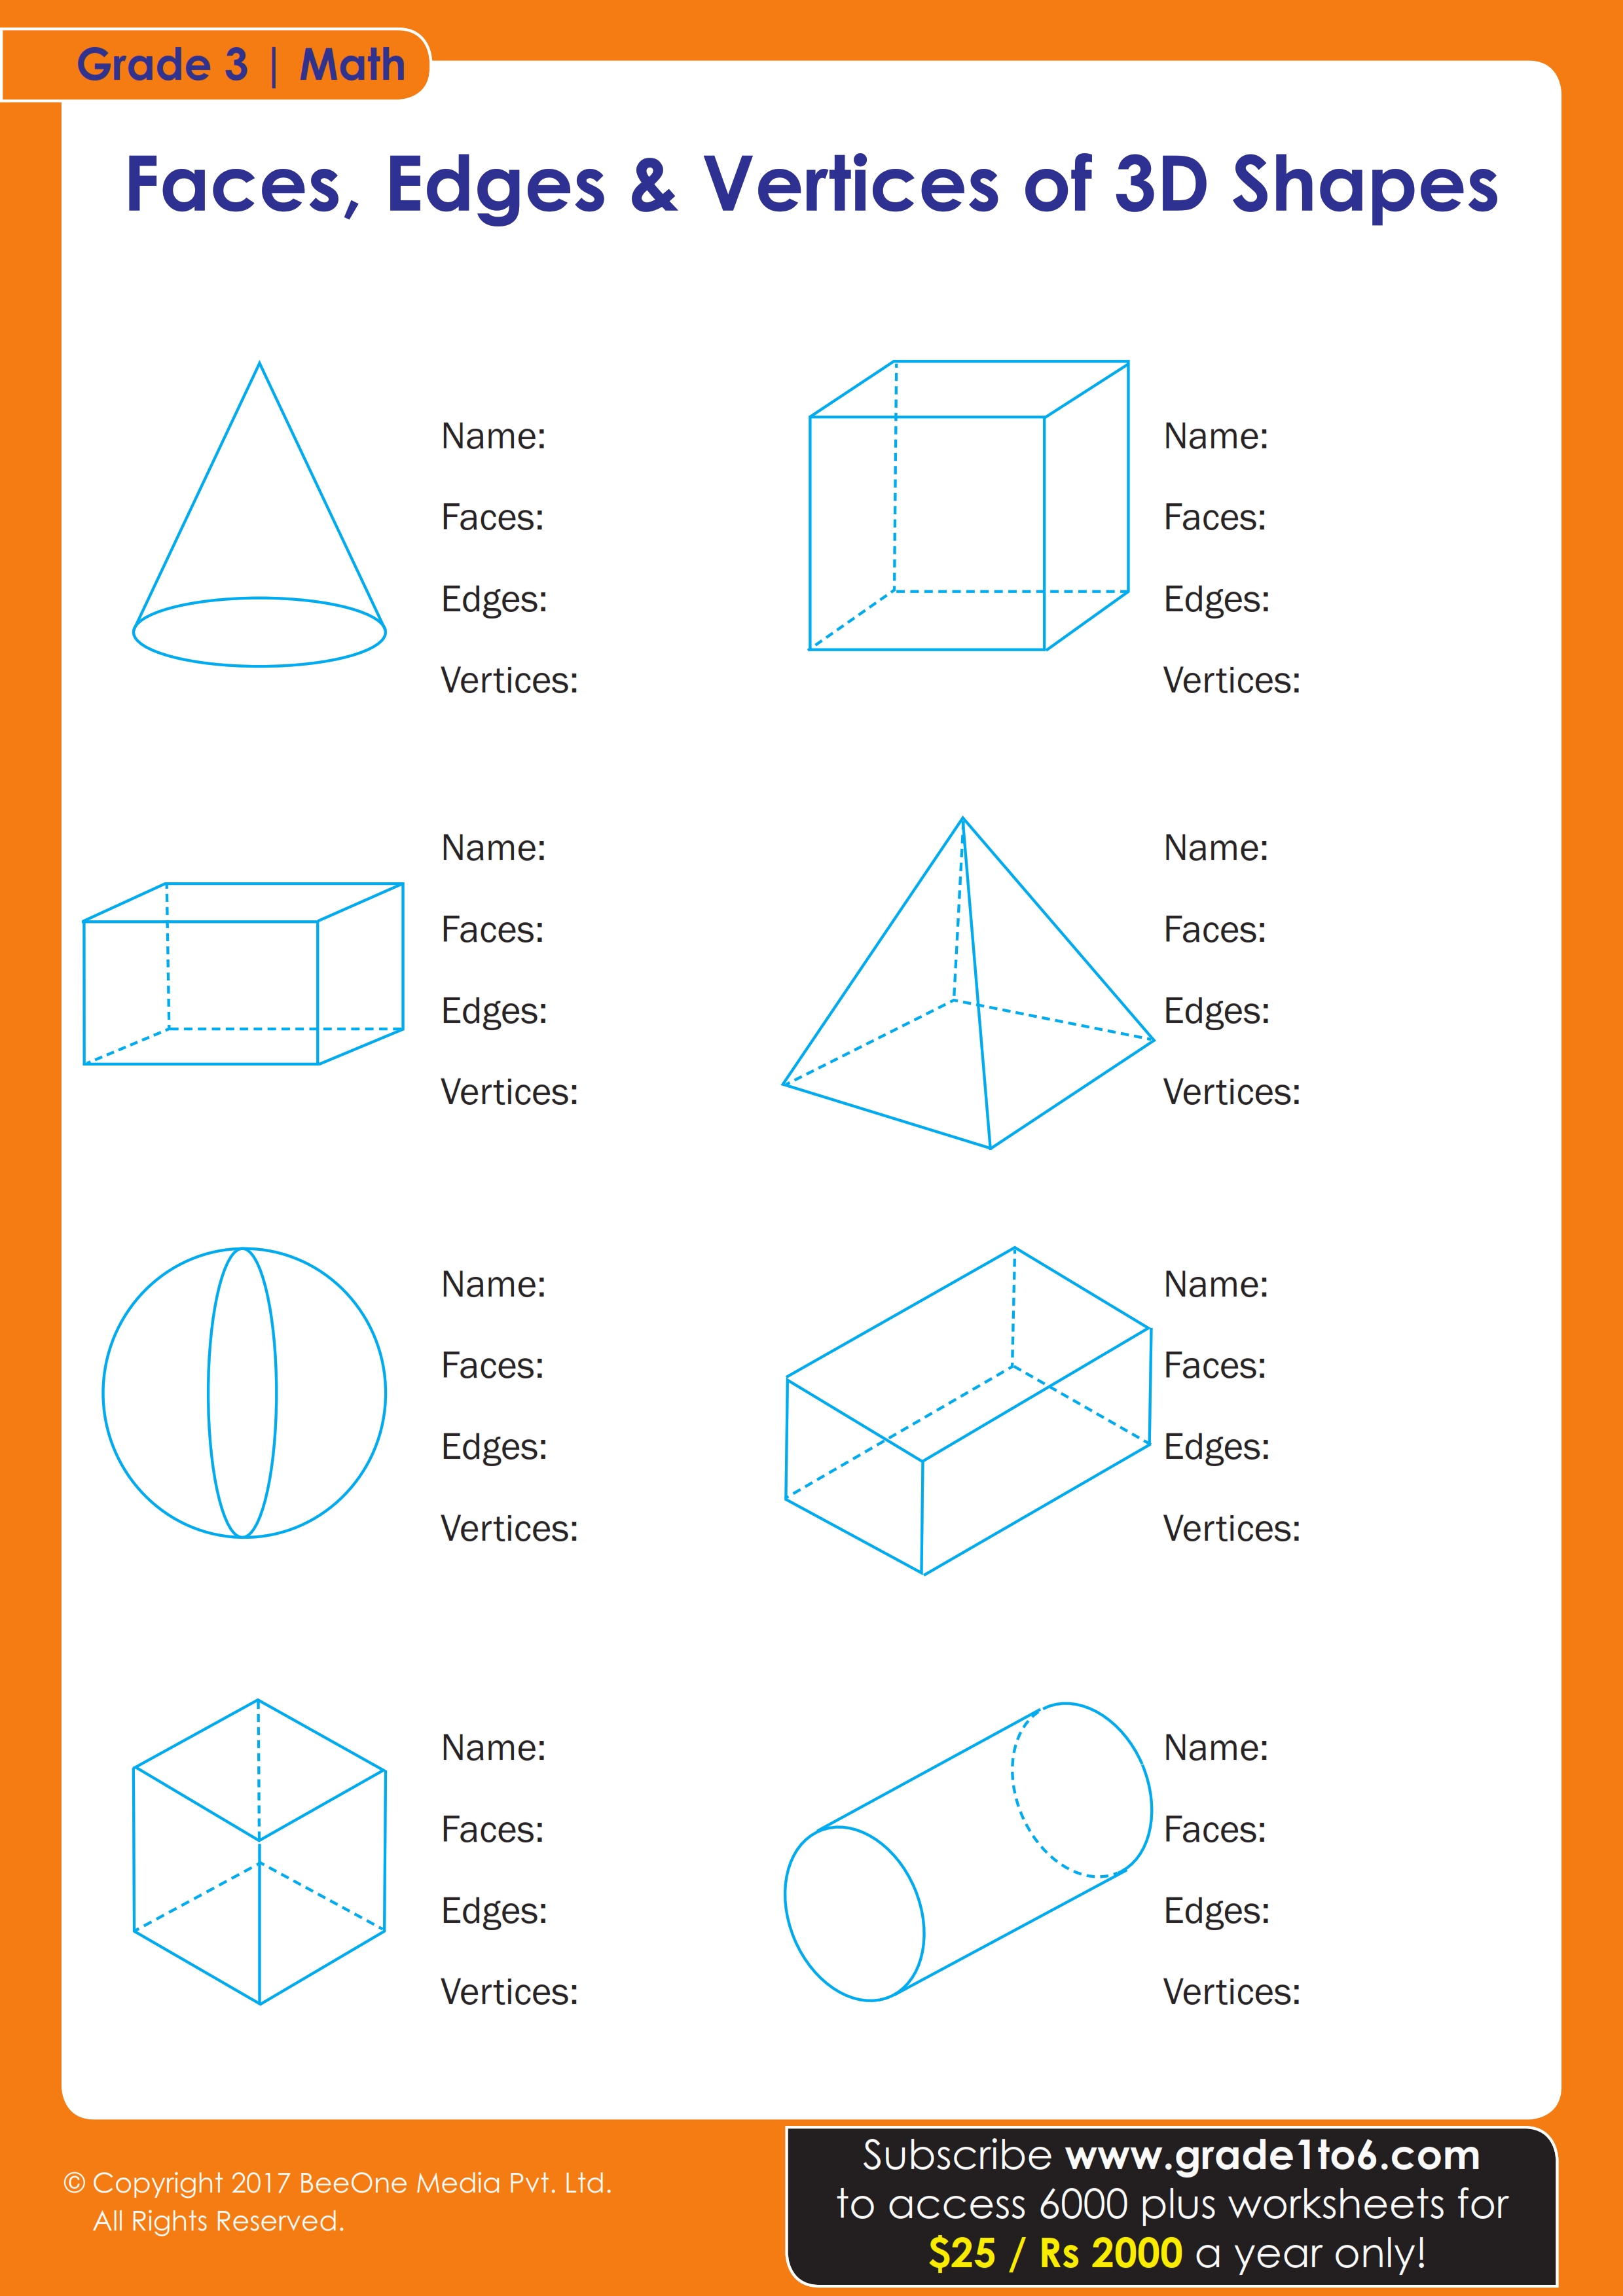 Vertices, Faces and Edges in Maths (Vertices, Faces and Edges